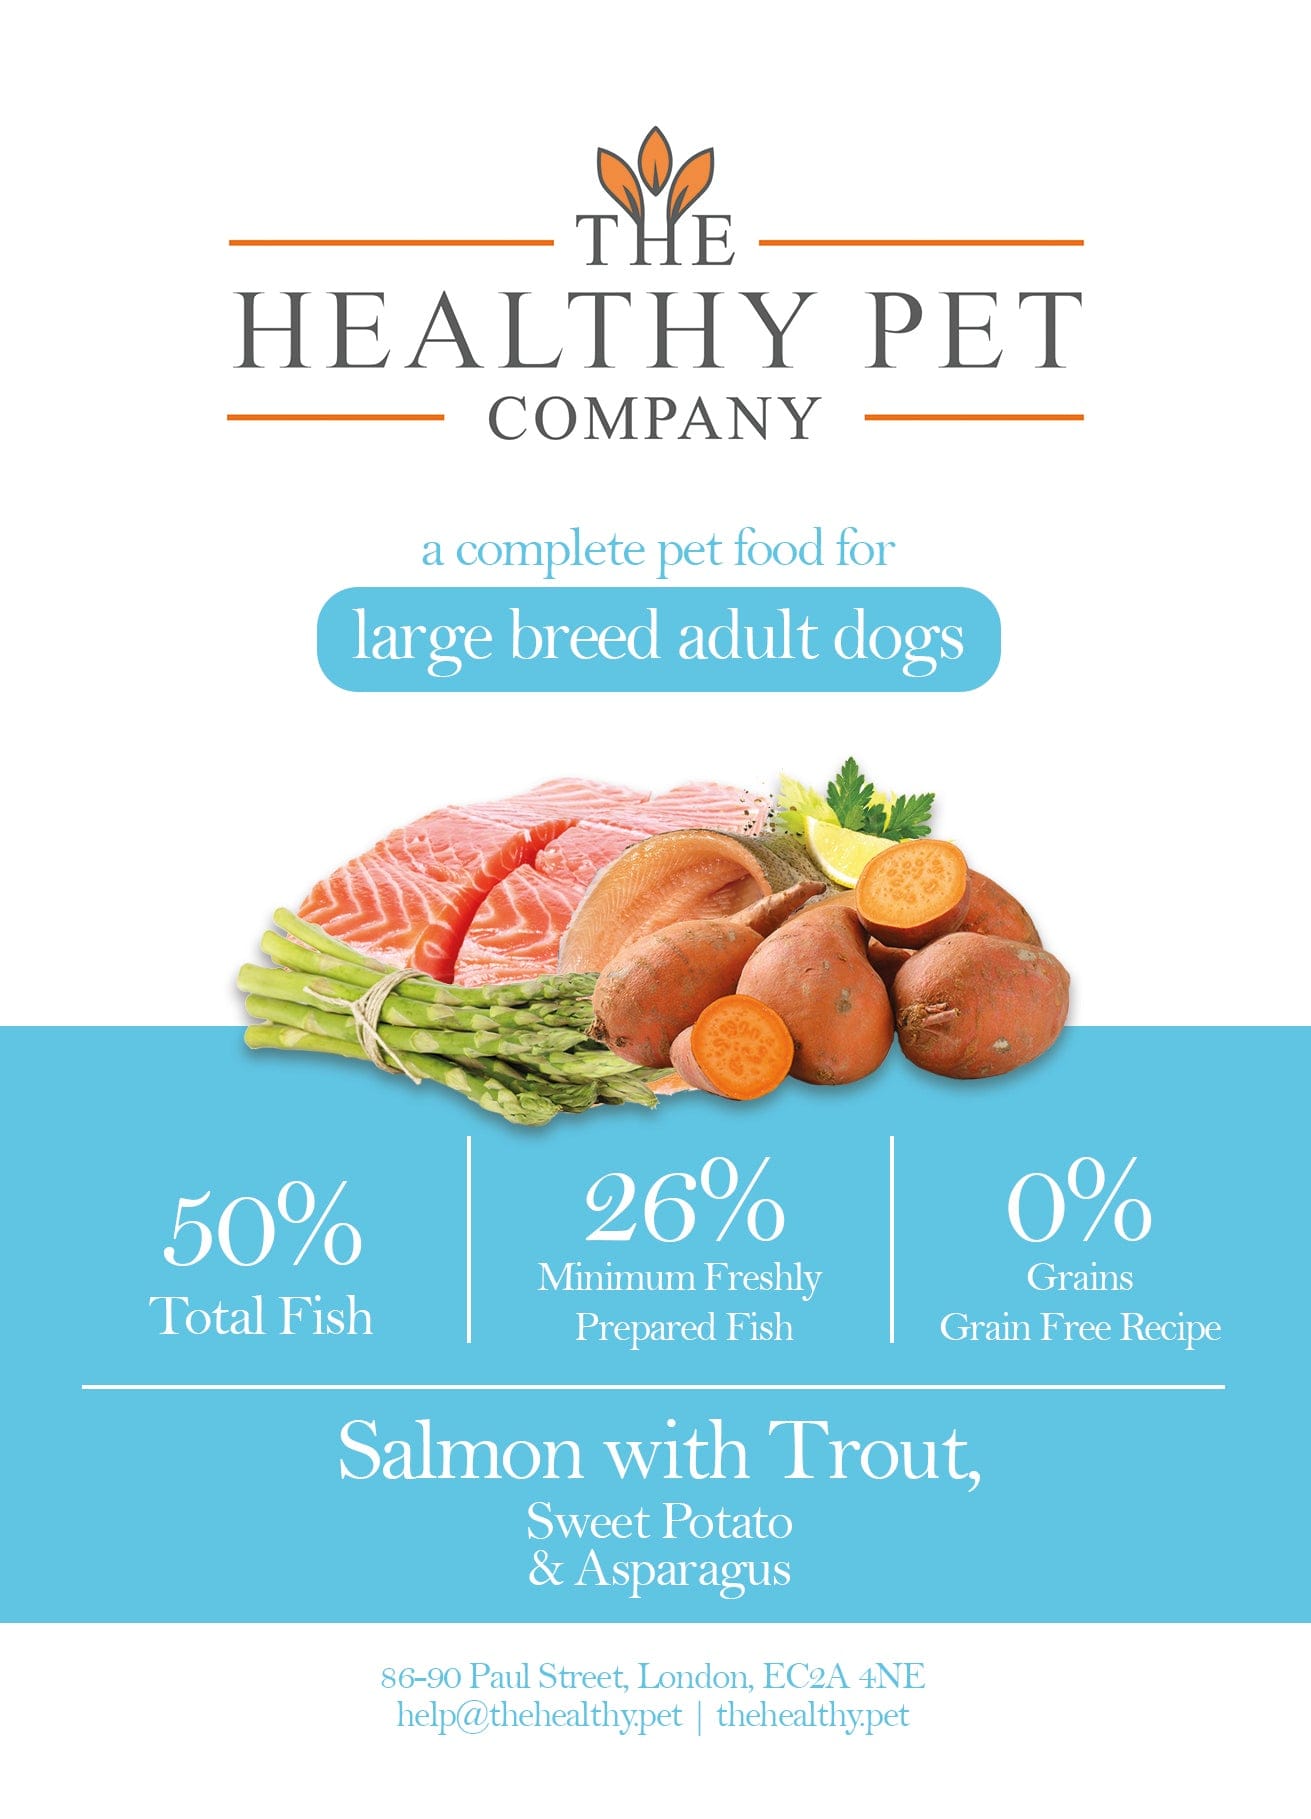 The Healthy Pet Company Complete Meal - Salmon & Trout with Sweet Potato for Large Breed Adult Dogs - The Healthy Pet Company